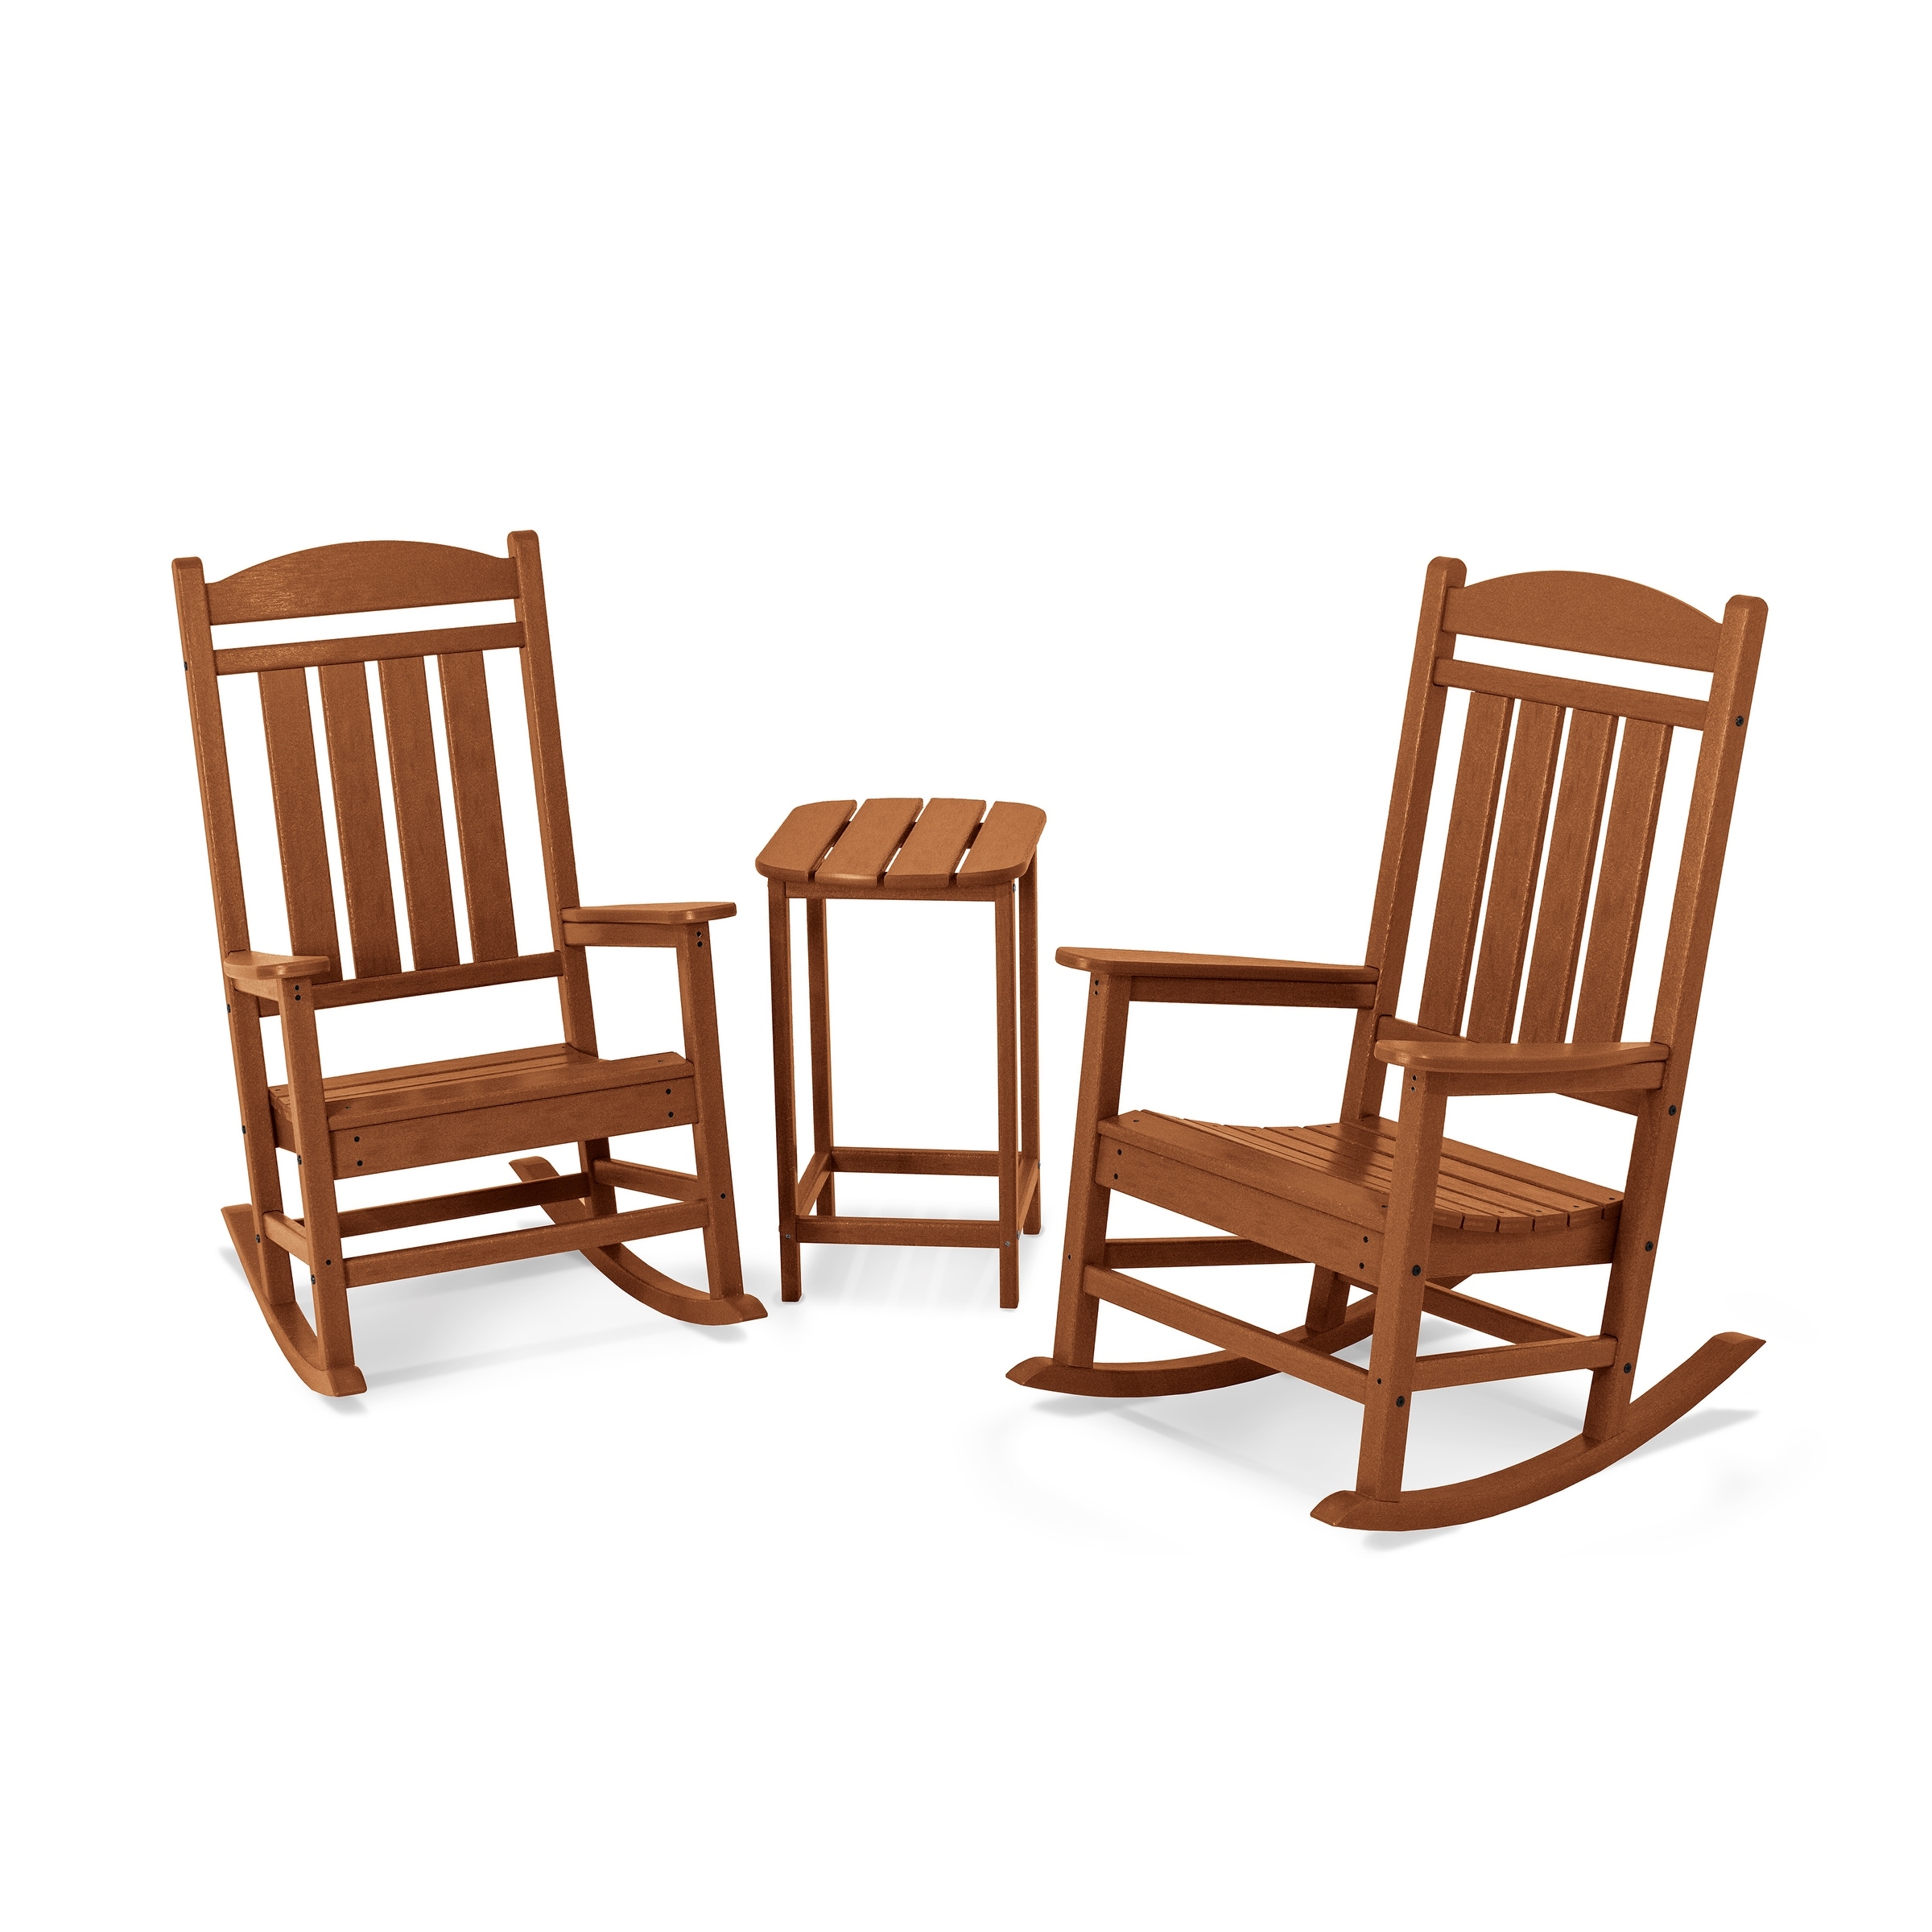 Polywood Presidential 3-piece Outdoor Rocking Chair Set With Table